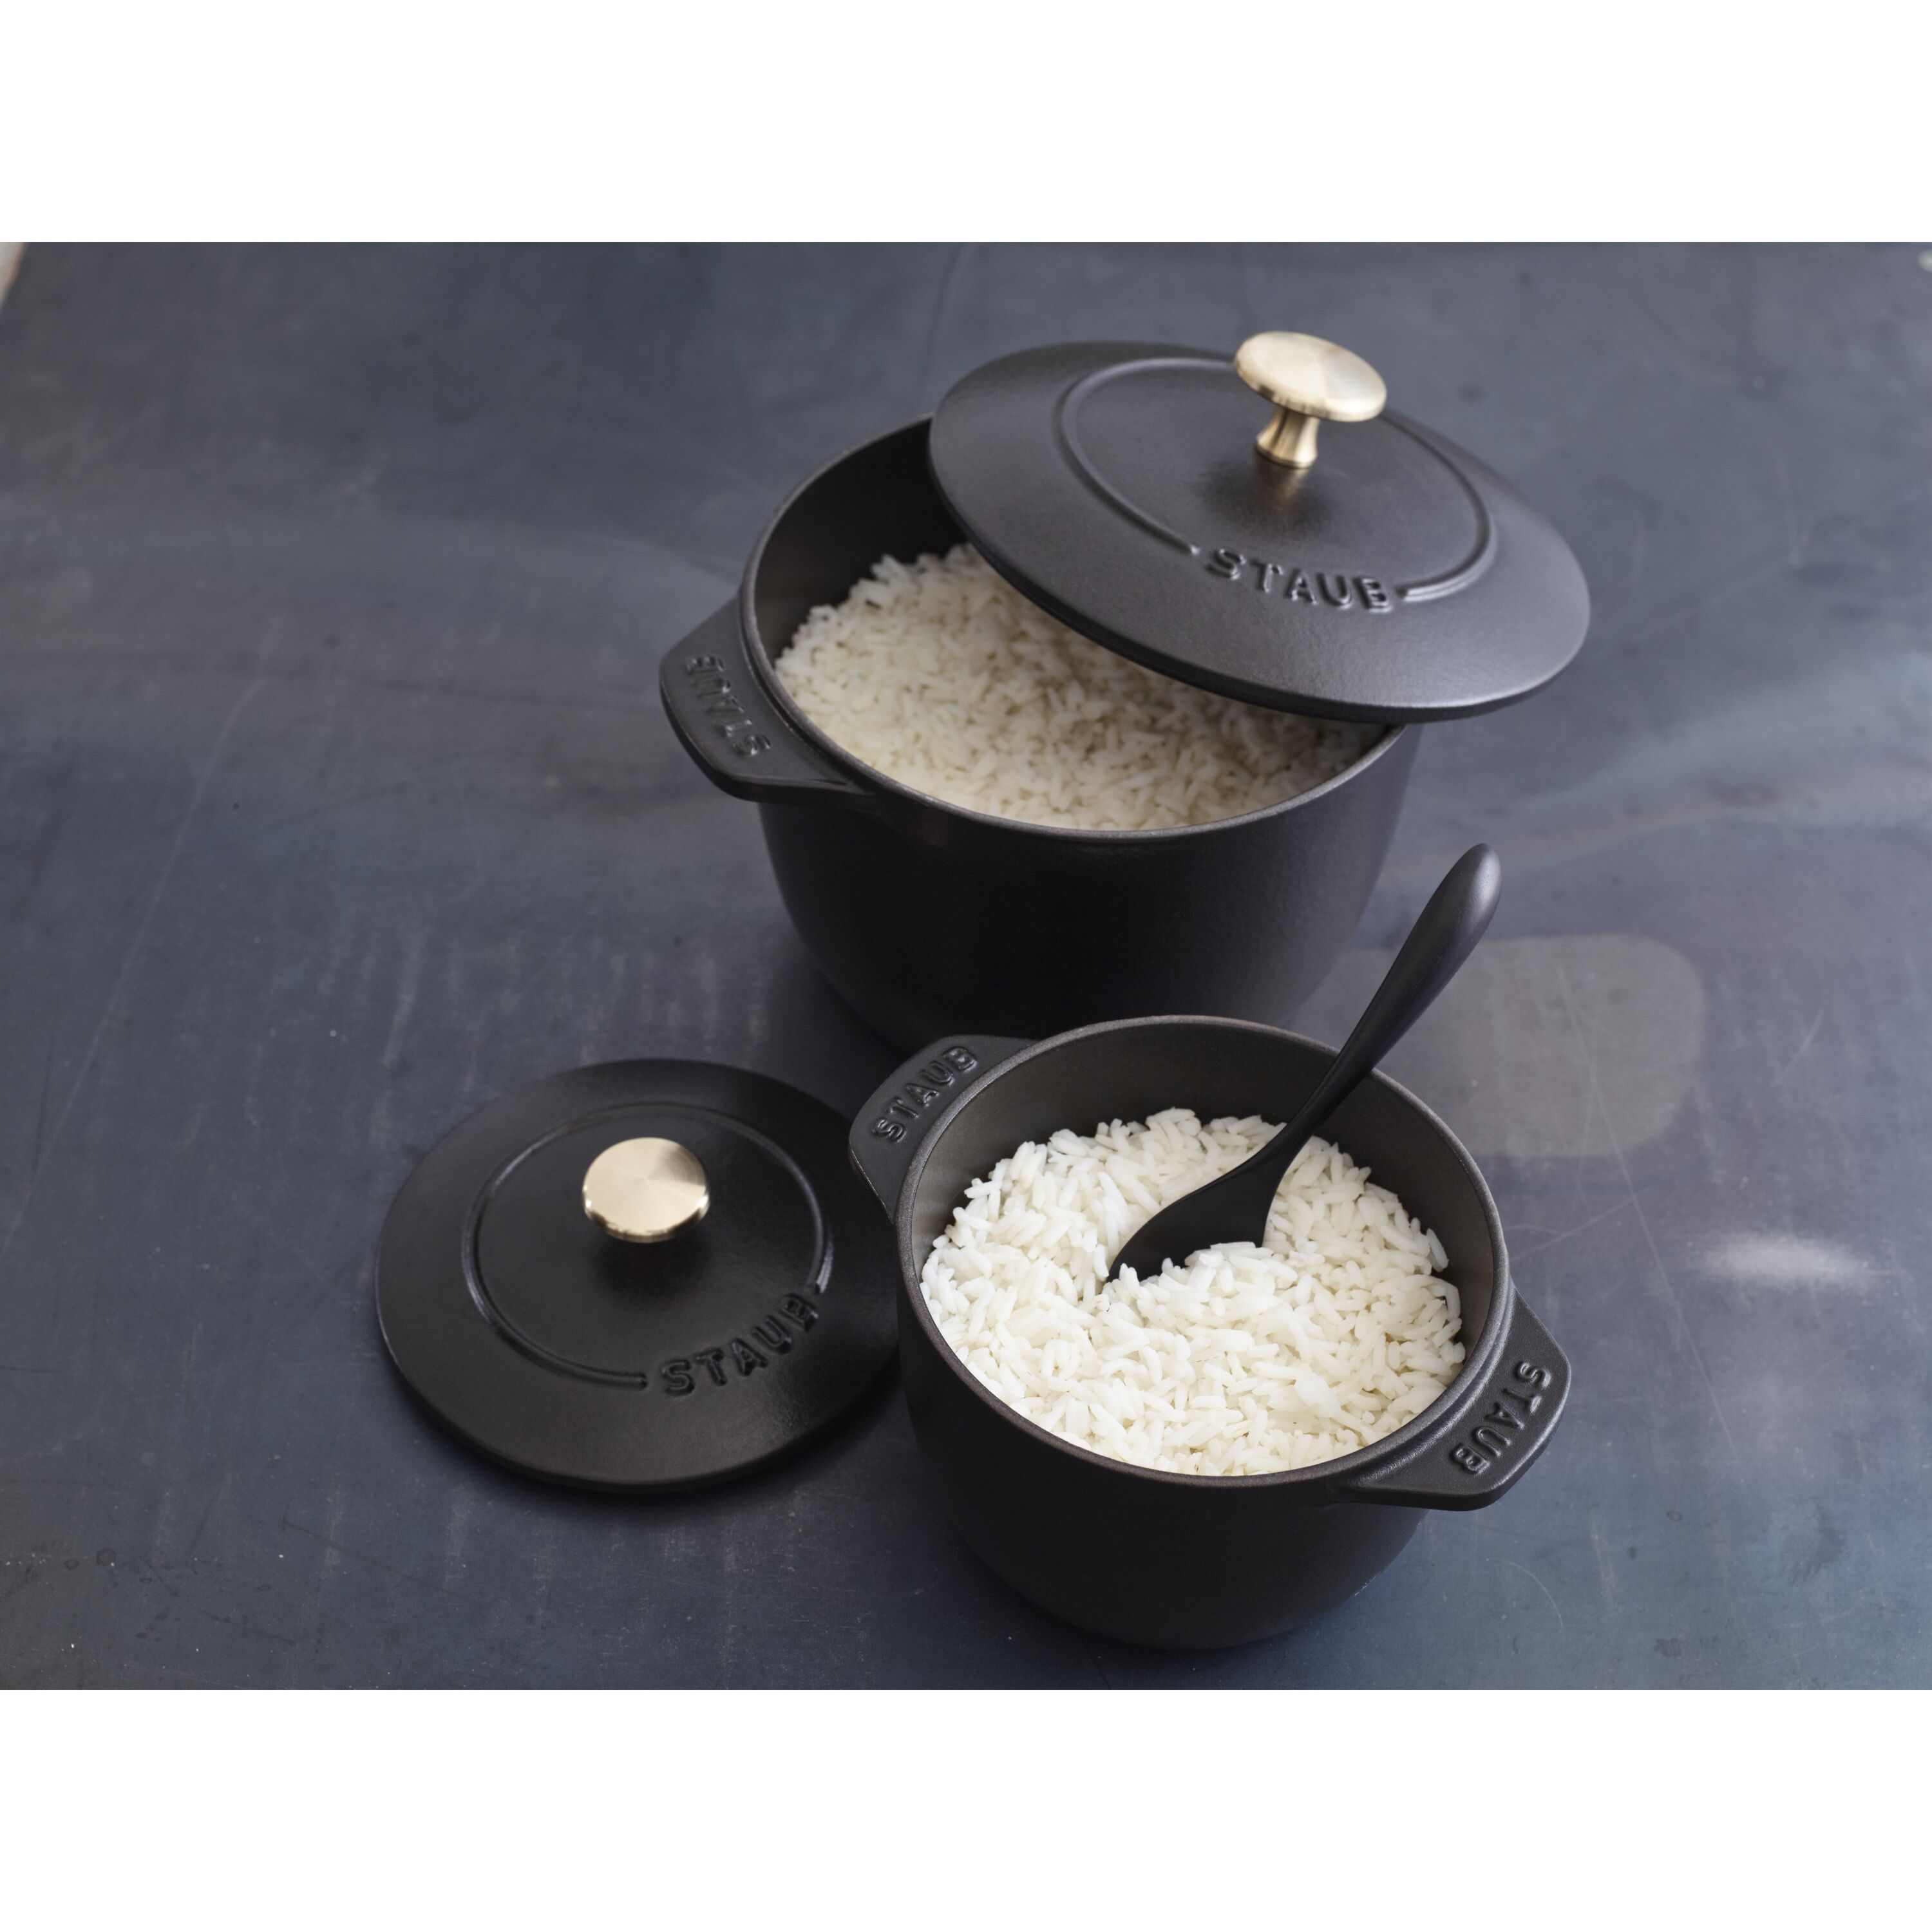 Buy Staub Cast Iron - Specialty Items Rice cocotte